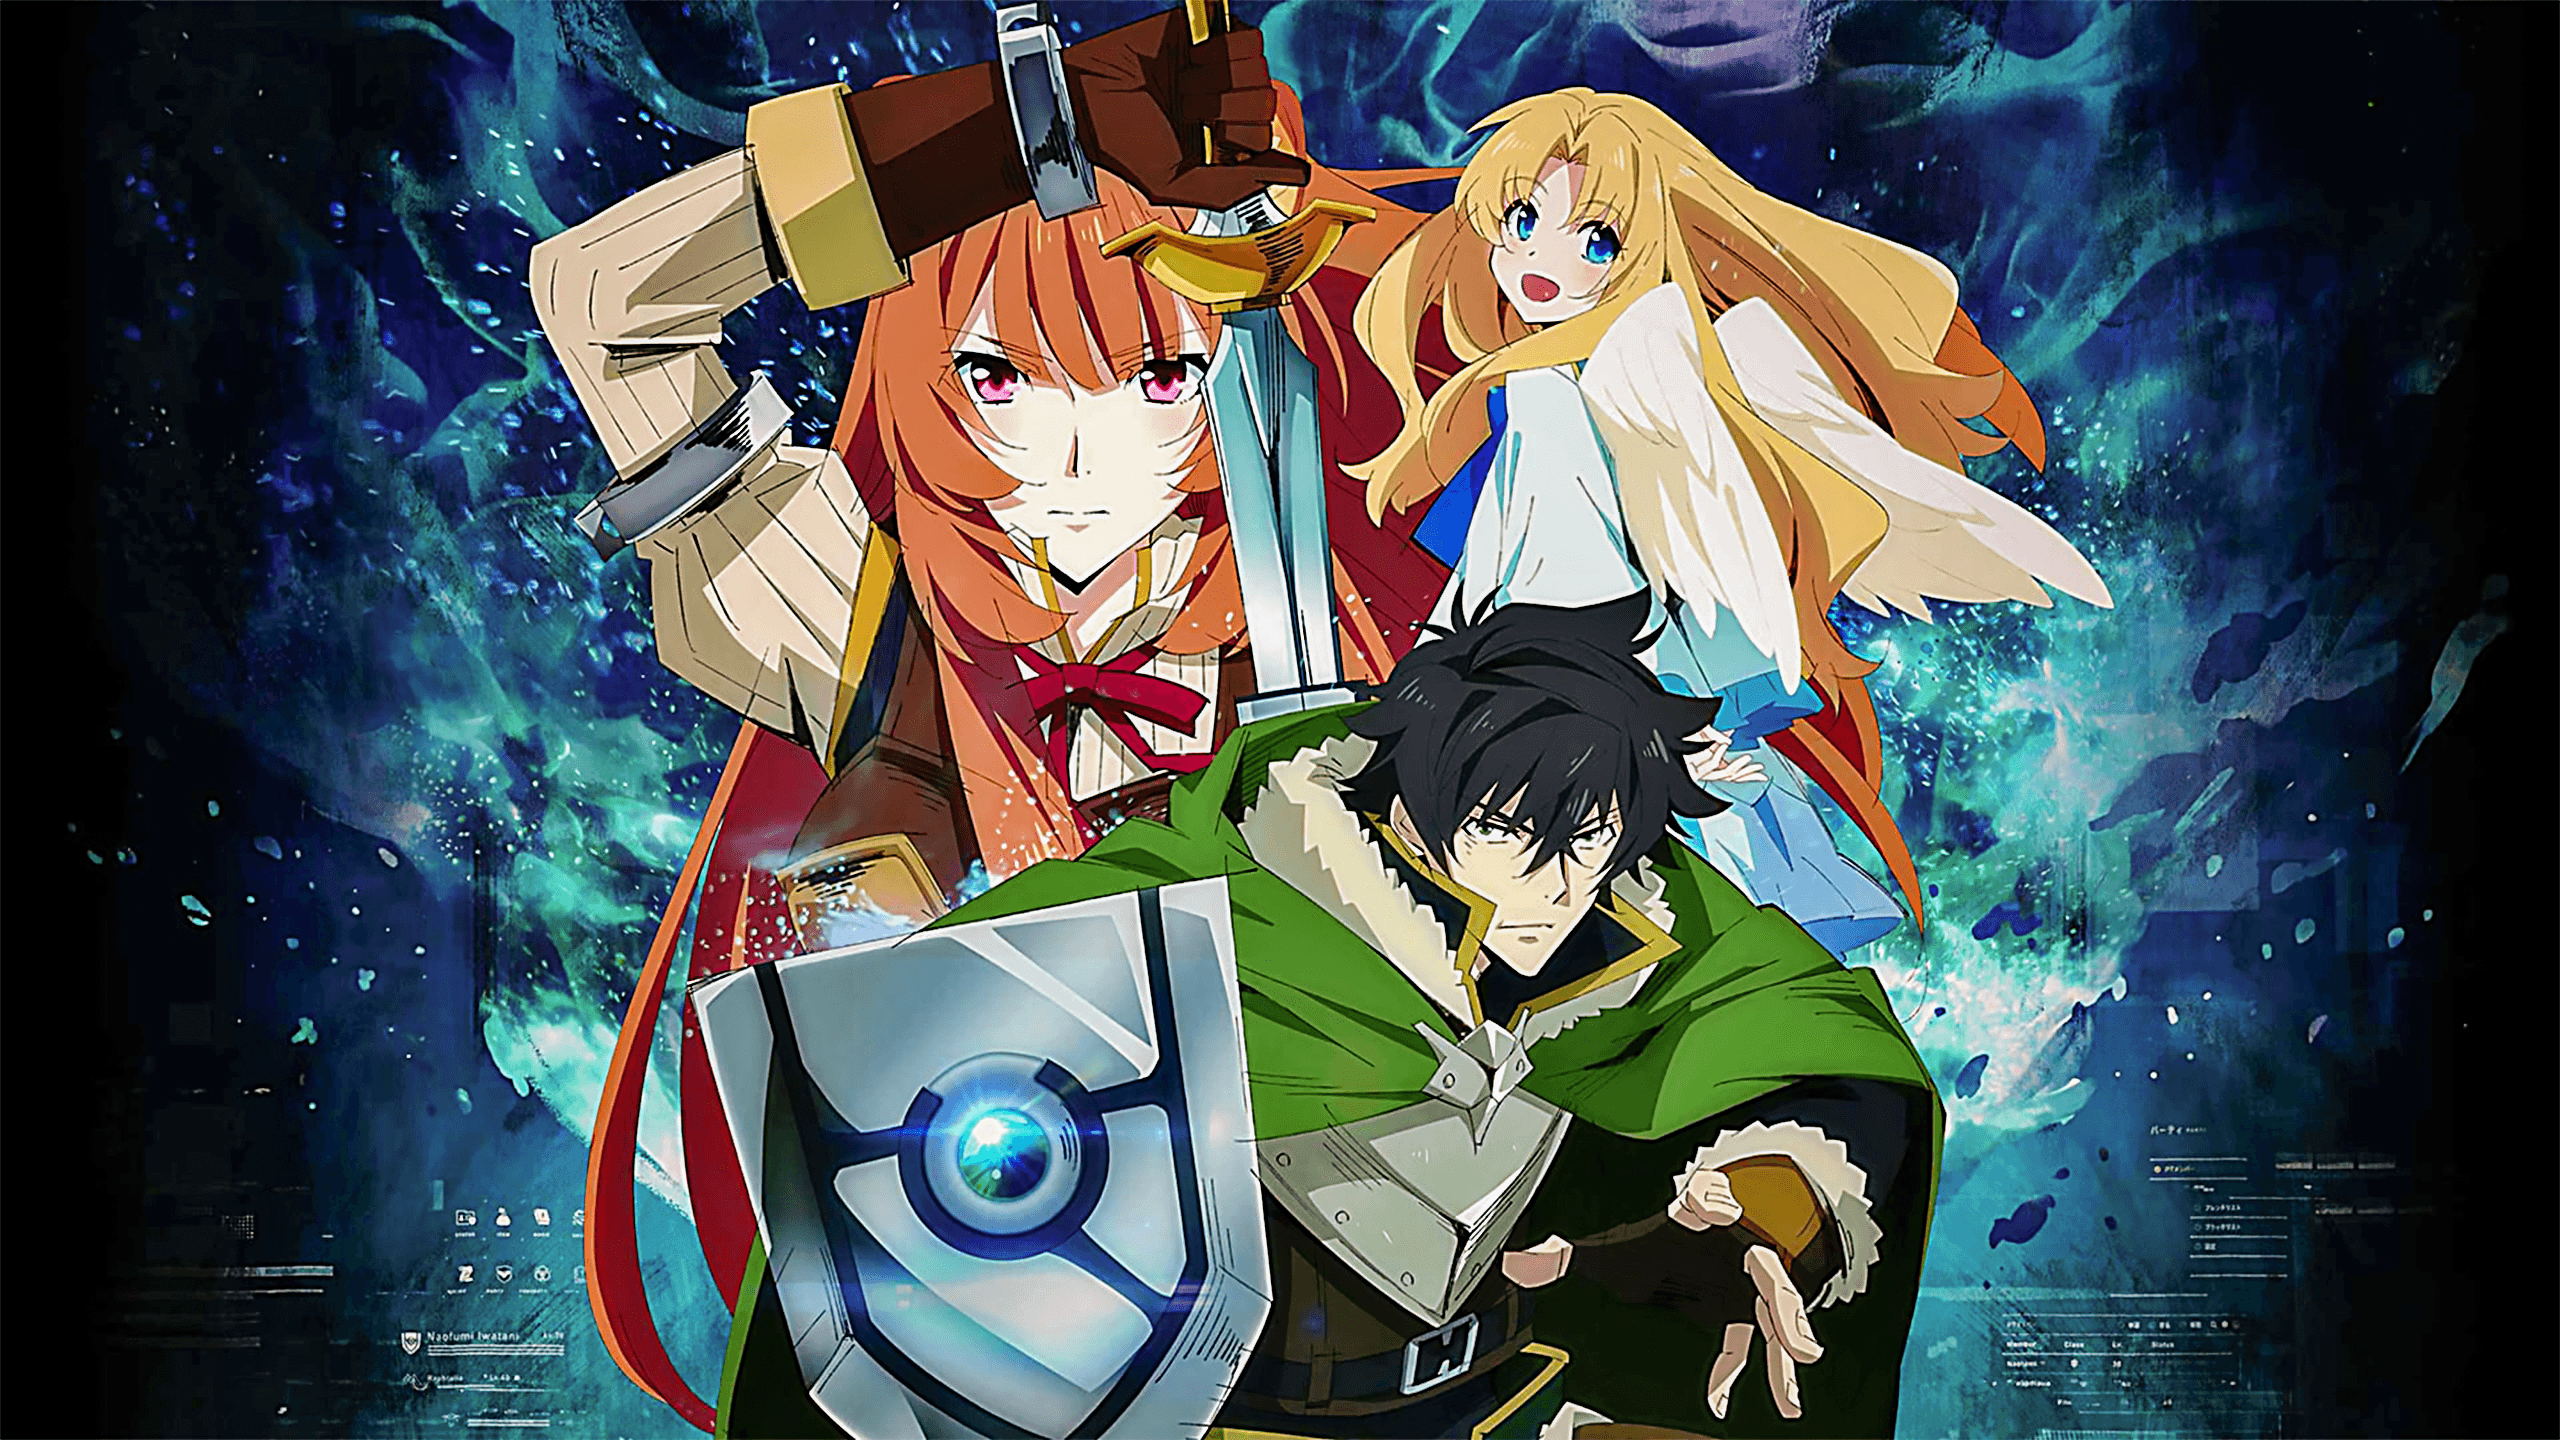 Tons of awesome The Rising of the Shield Hero: The Manga Companion wallpape...